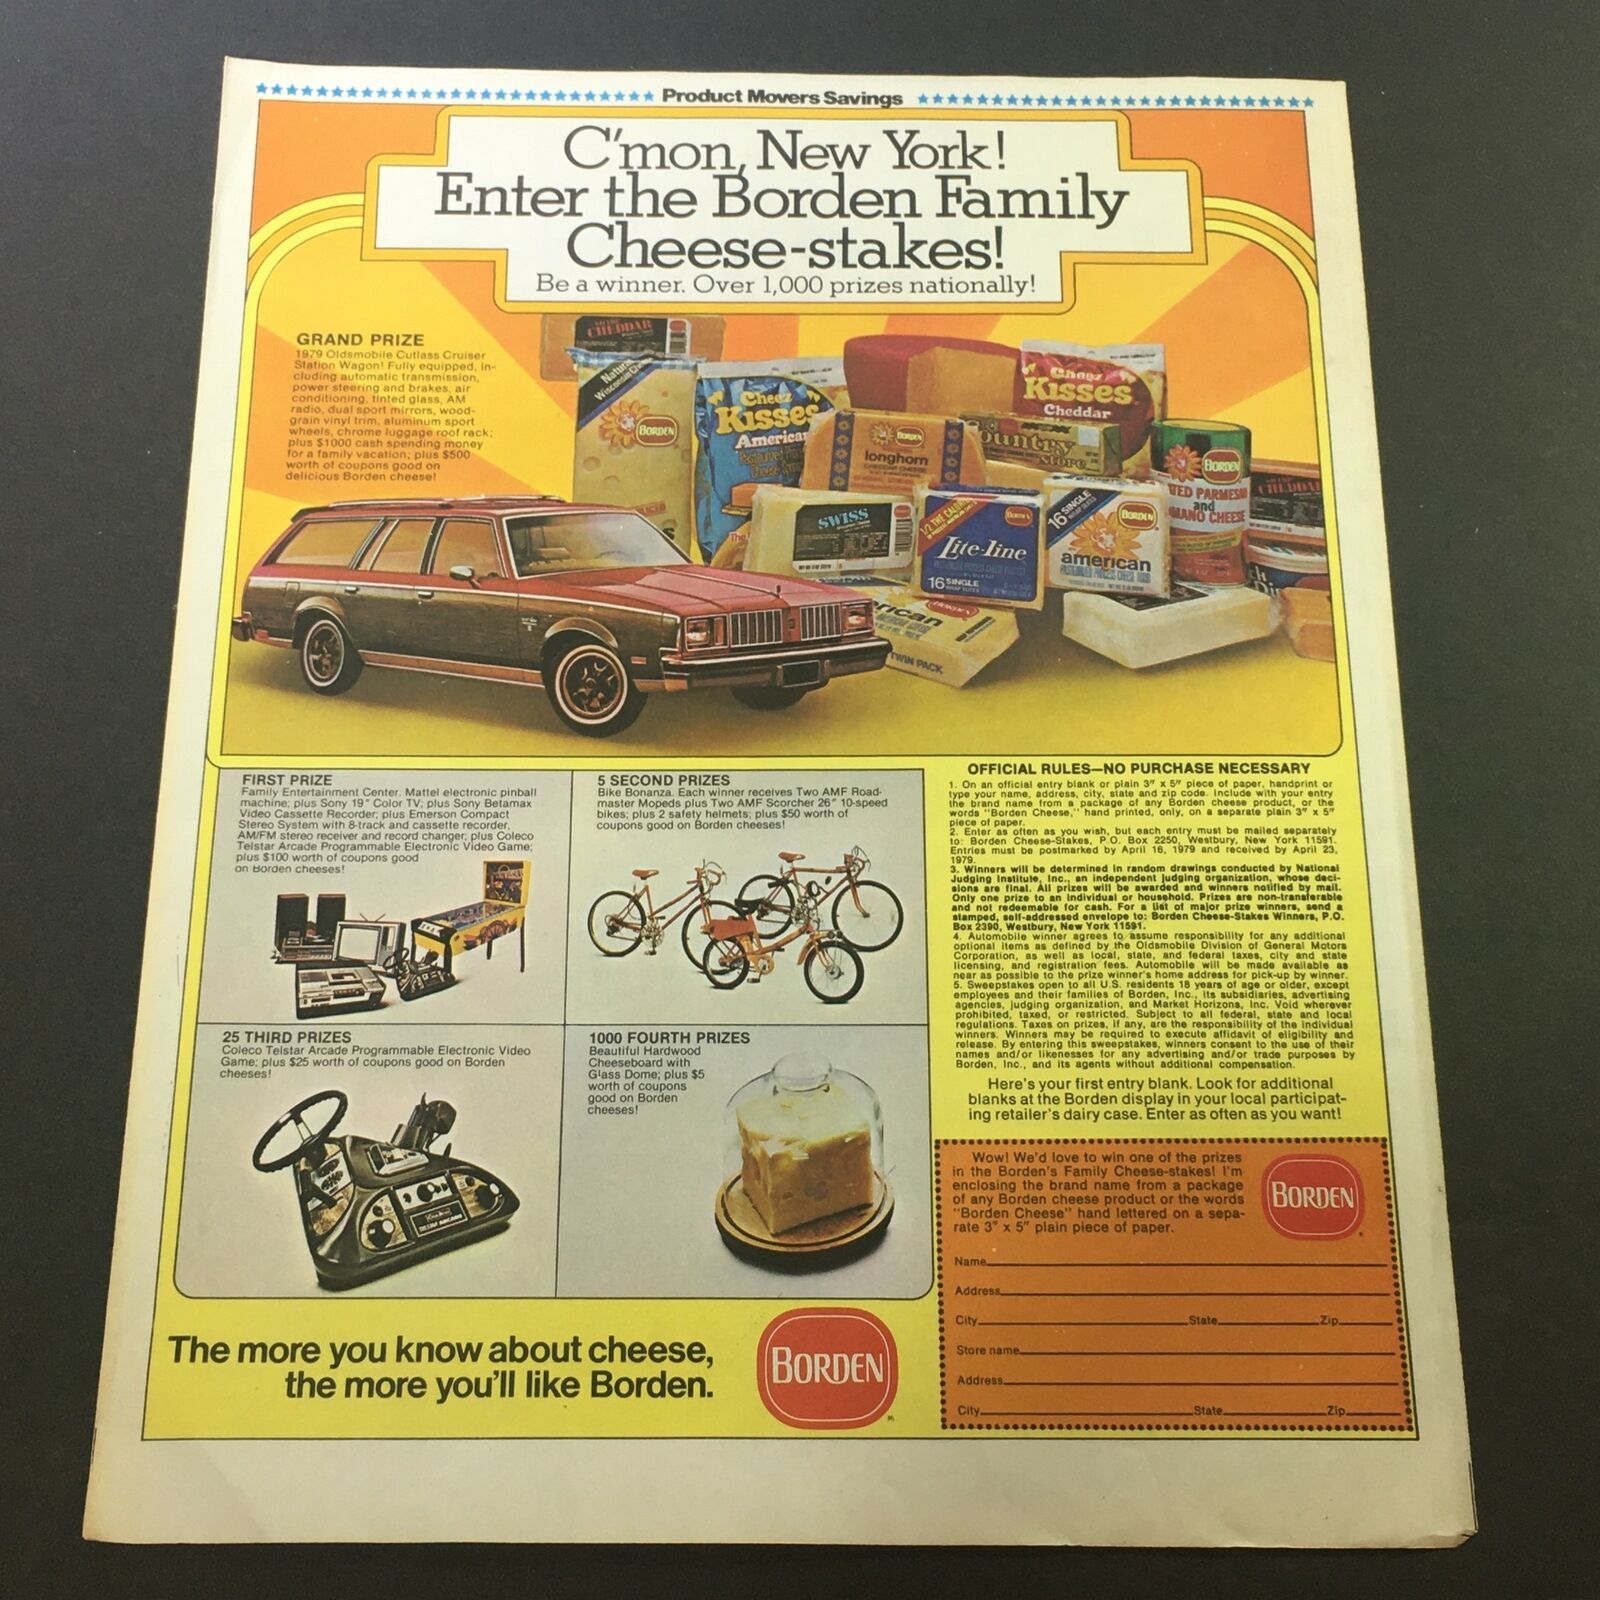 VTG 1979 Borden Cheese Products Family Cheese-Stakes Print Ad Coupon